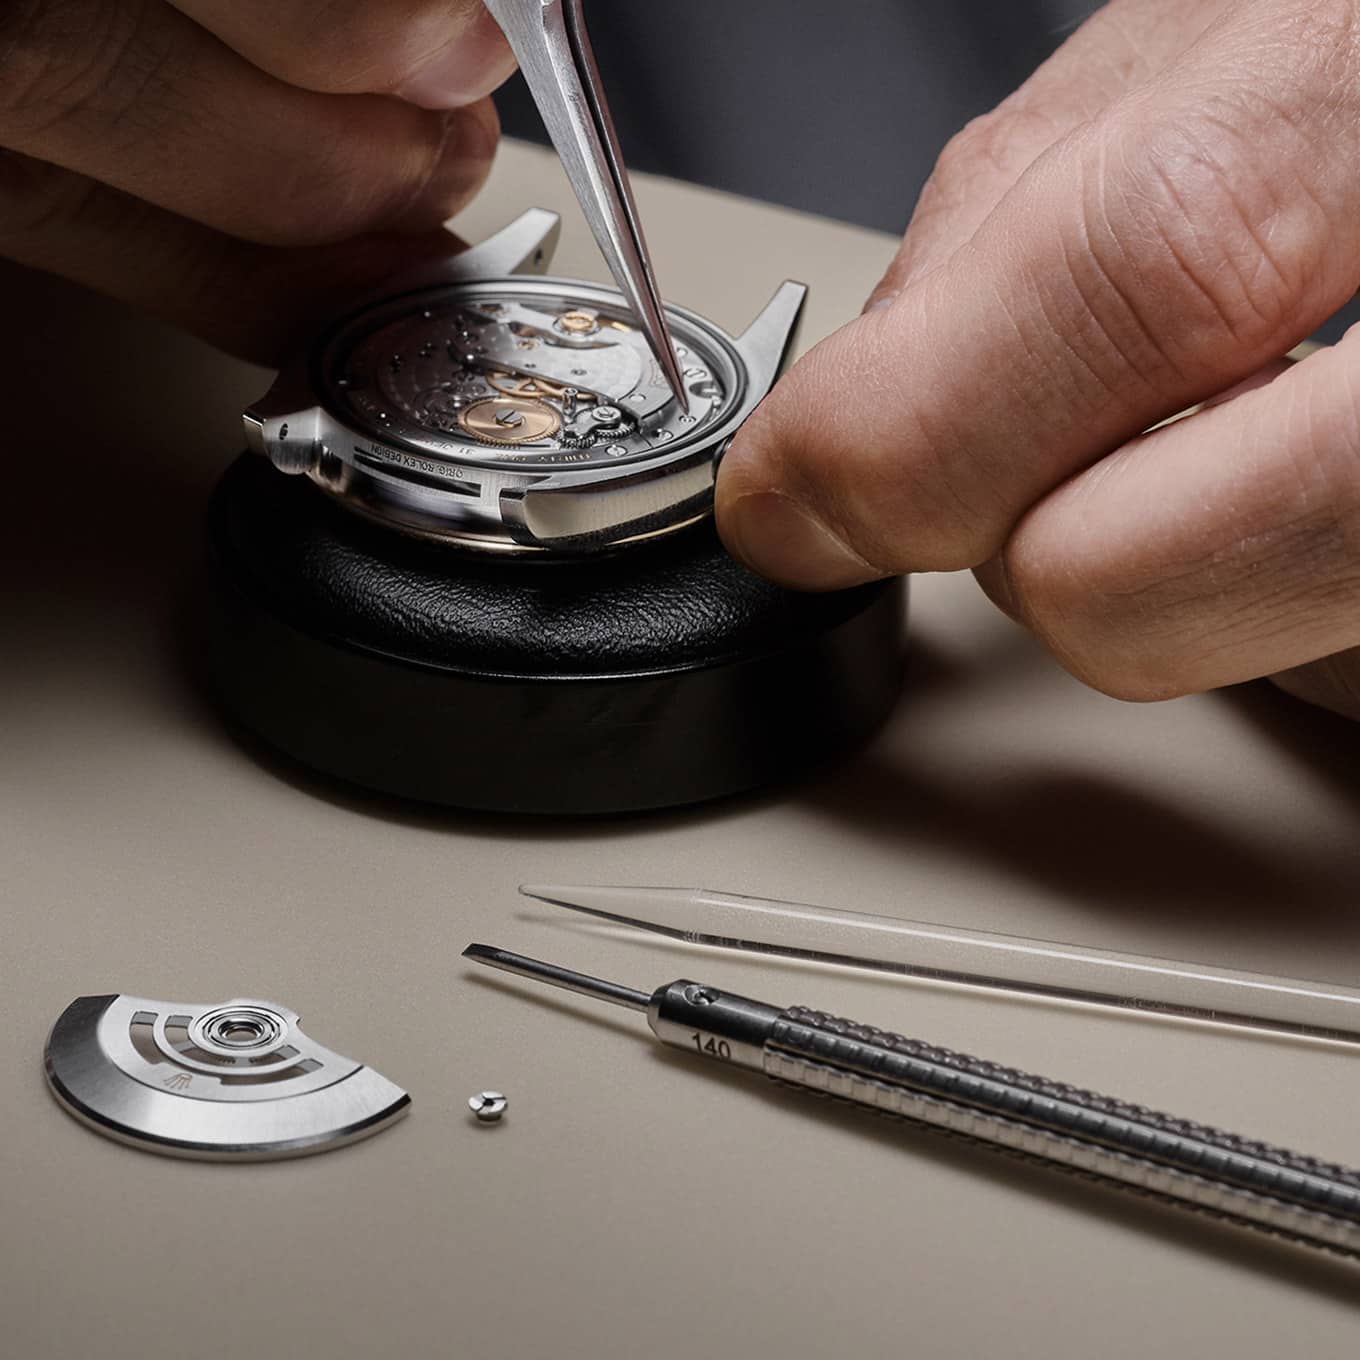 Dismantling of the Rolex Movement